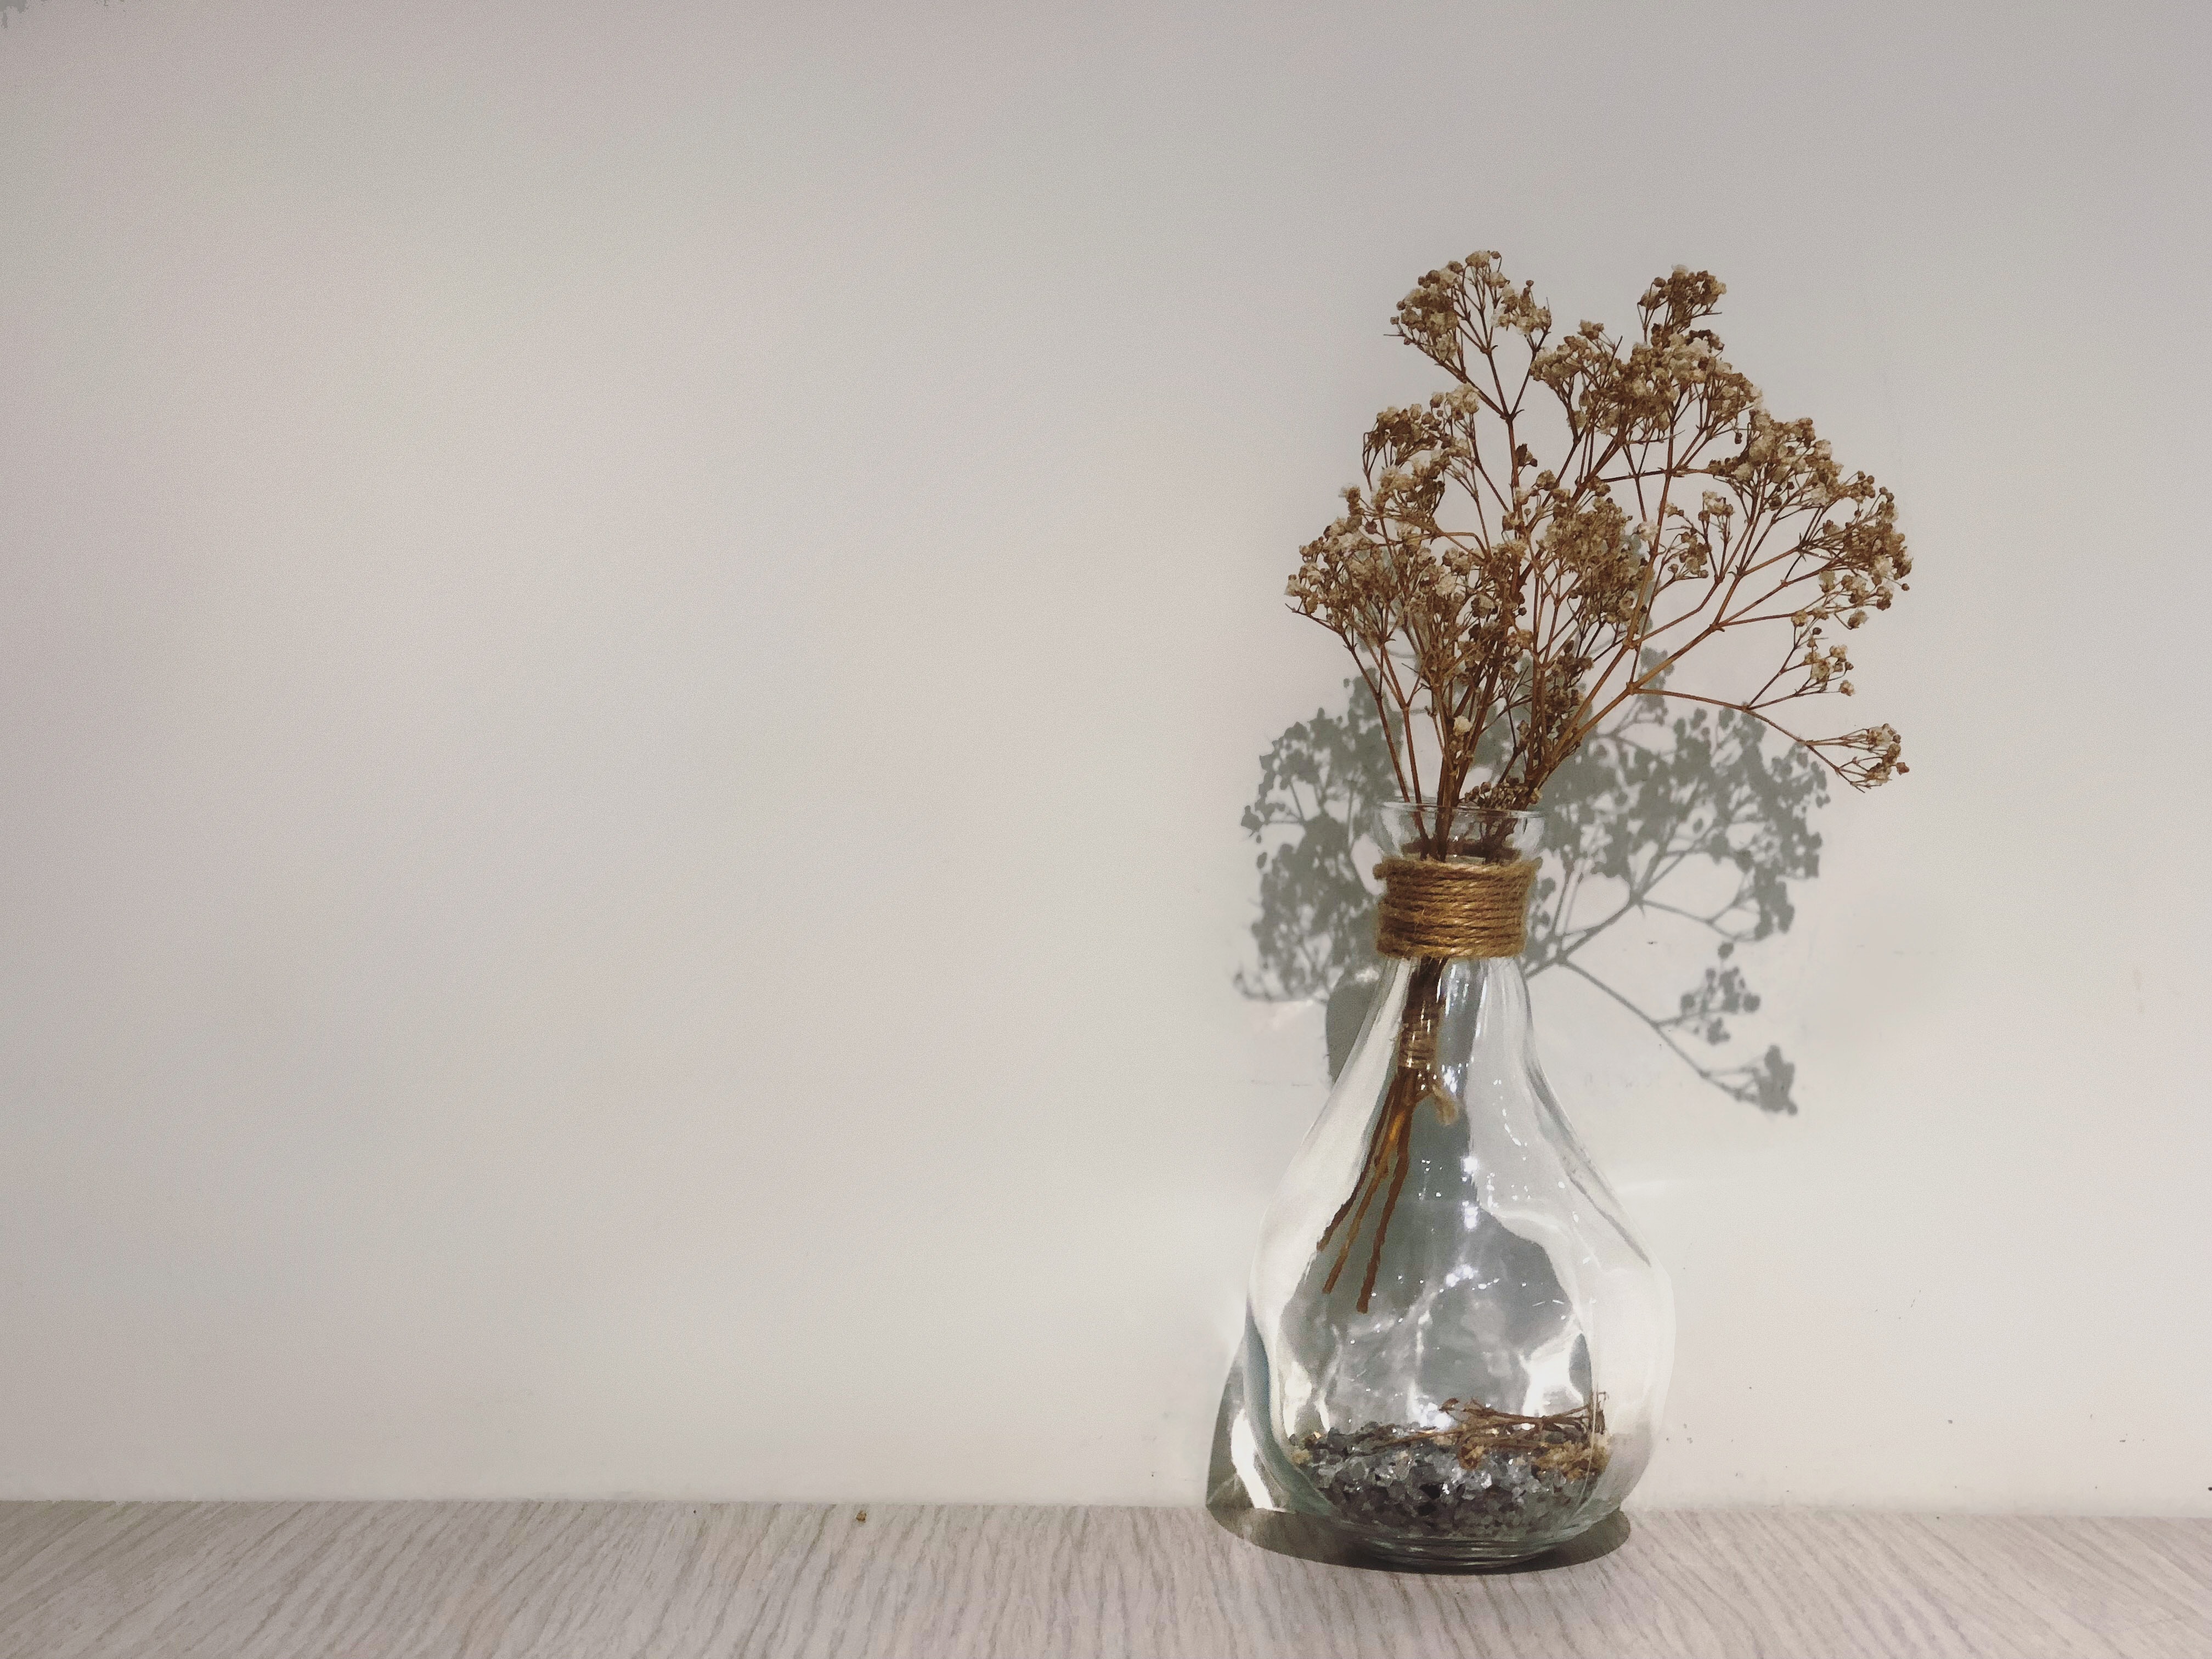 Dried leaves on glass vase beside concrete wall photo